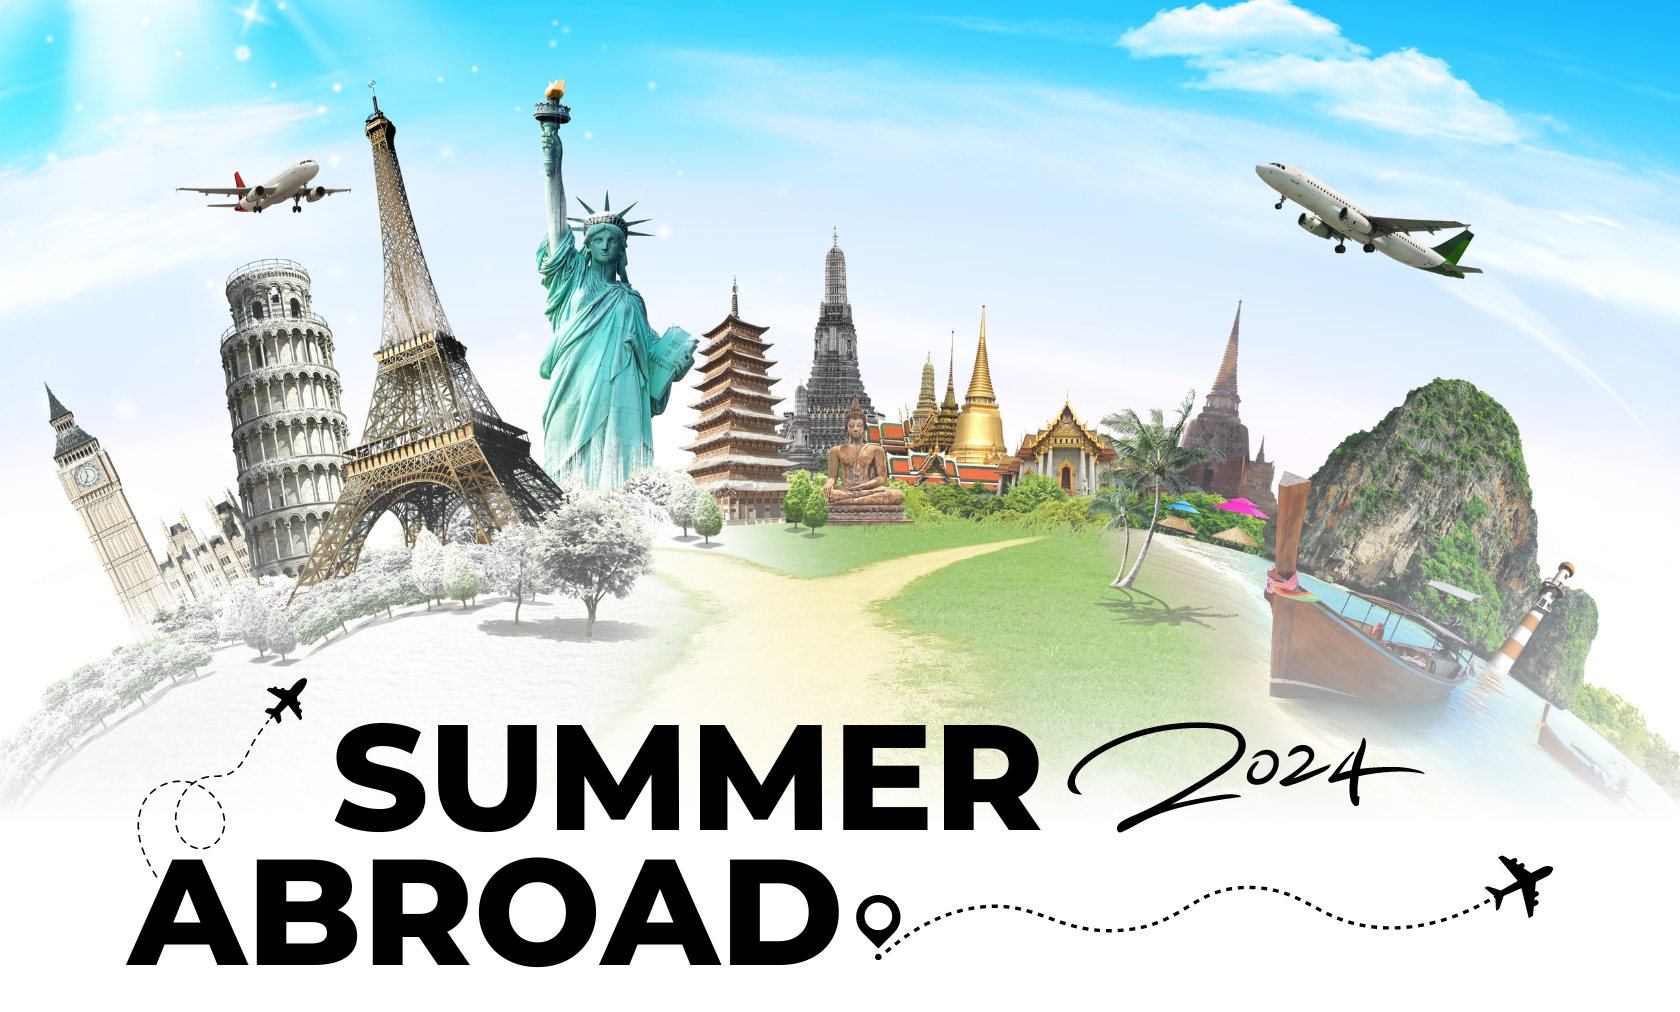 It is time to study abroad this summer 2023. Application deadline is April 21st, 2023